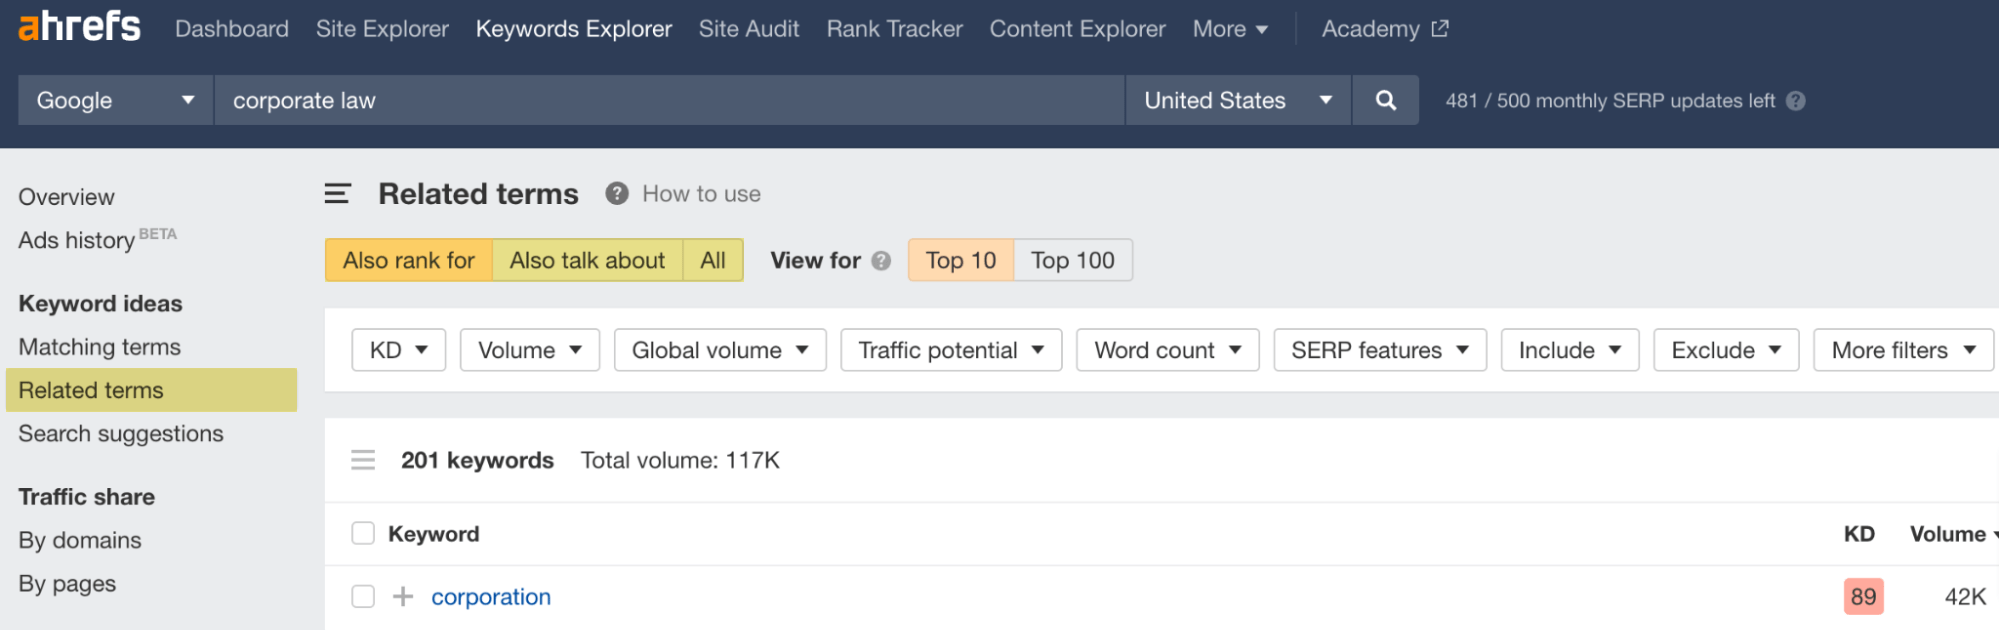 Related terms report in Ahrefs' Keywords Explorer